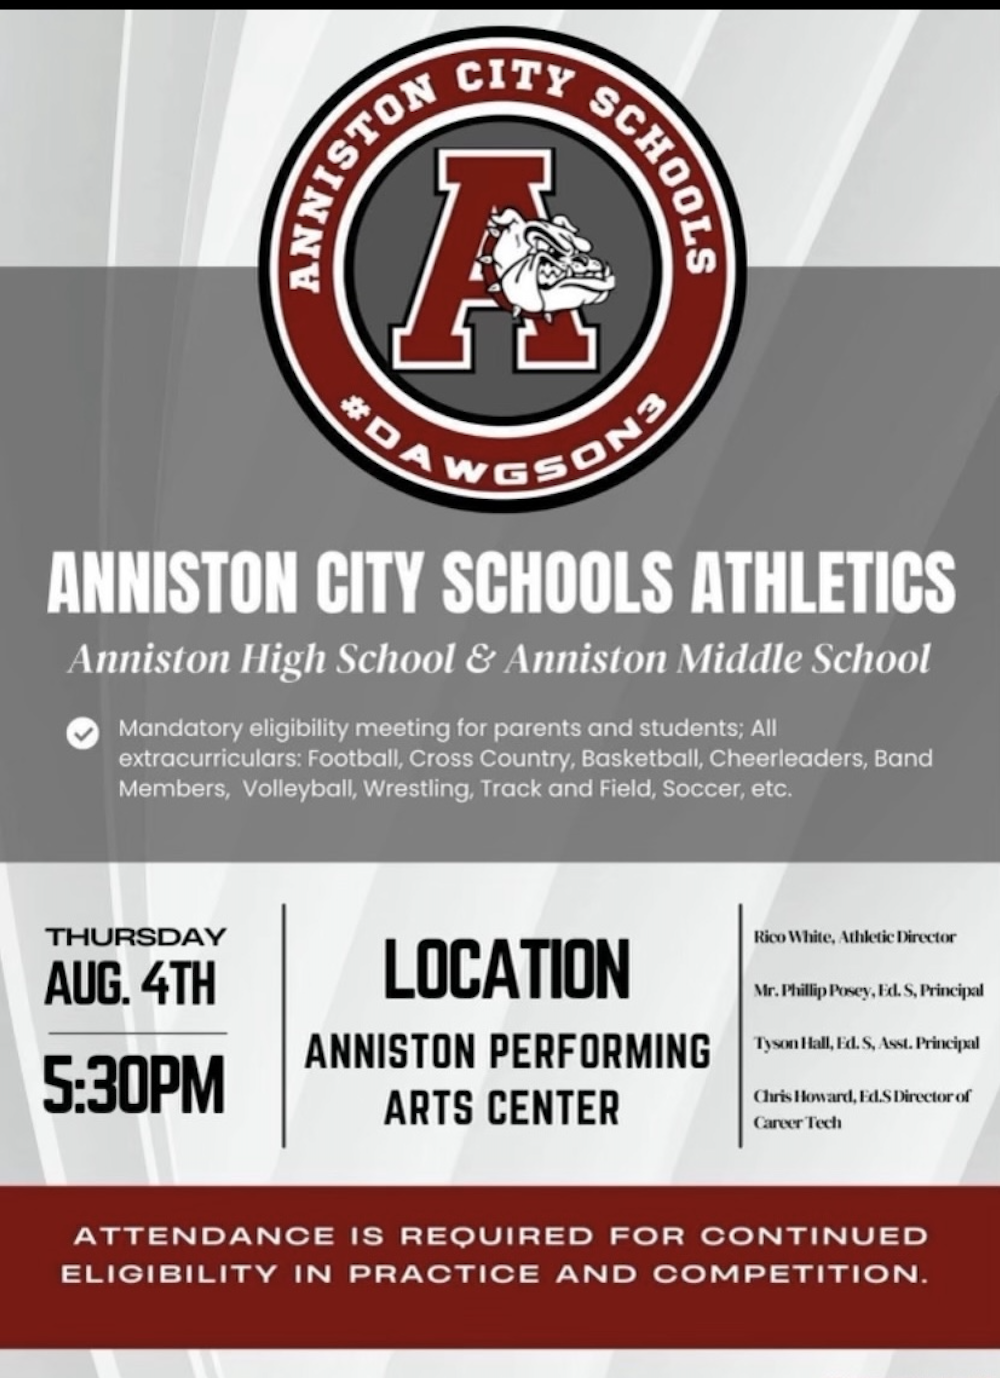 Anniston City School Athletics | Eligibility Meeting | 08/04/22 ___________ Attention Anniston High School and Middle School parents and students, on August 4, 2022 at 5:30 PM there will be a mandatory eligibility meeting for all extracurricular school activities in the Anniston Performing Arts Center (1301 Woodstock Ave, Anniston, AL 36207). This includes: Football, Cross Country, Basketball, Cheerleading, Band, Volleyball, Wrestling, Track and Field, Soccer…etc.  Again, please note this meeting is mandatory. Attendance is required for continued eligibility in practice and competition!  